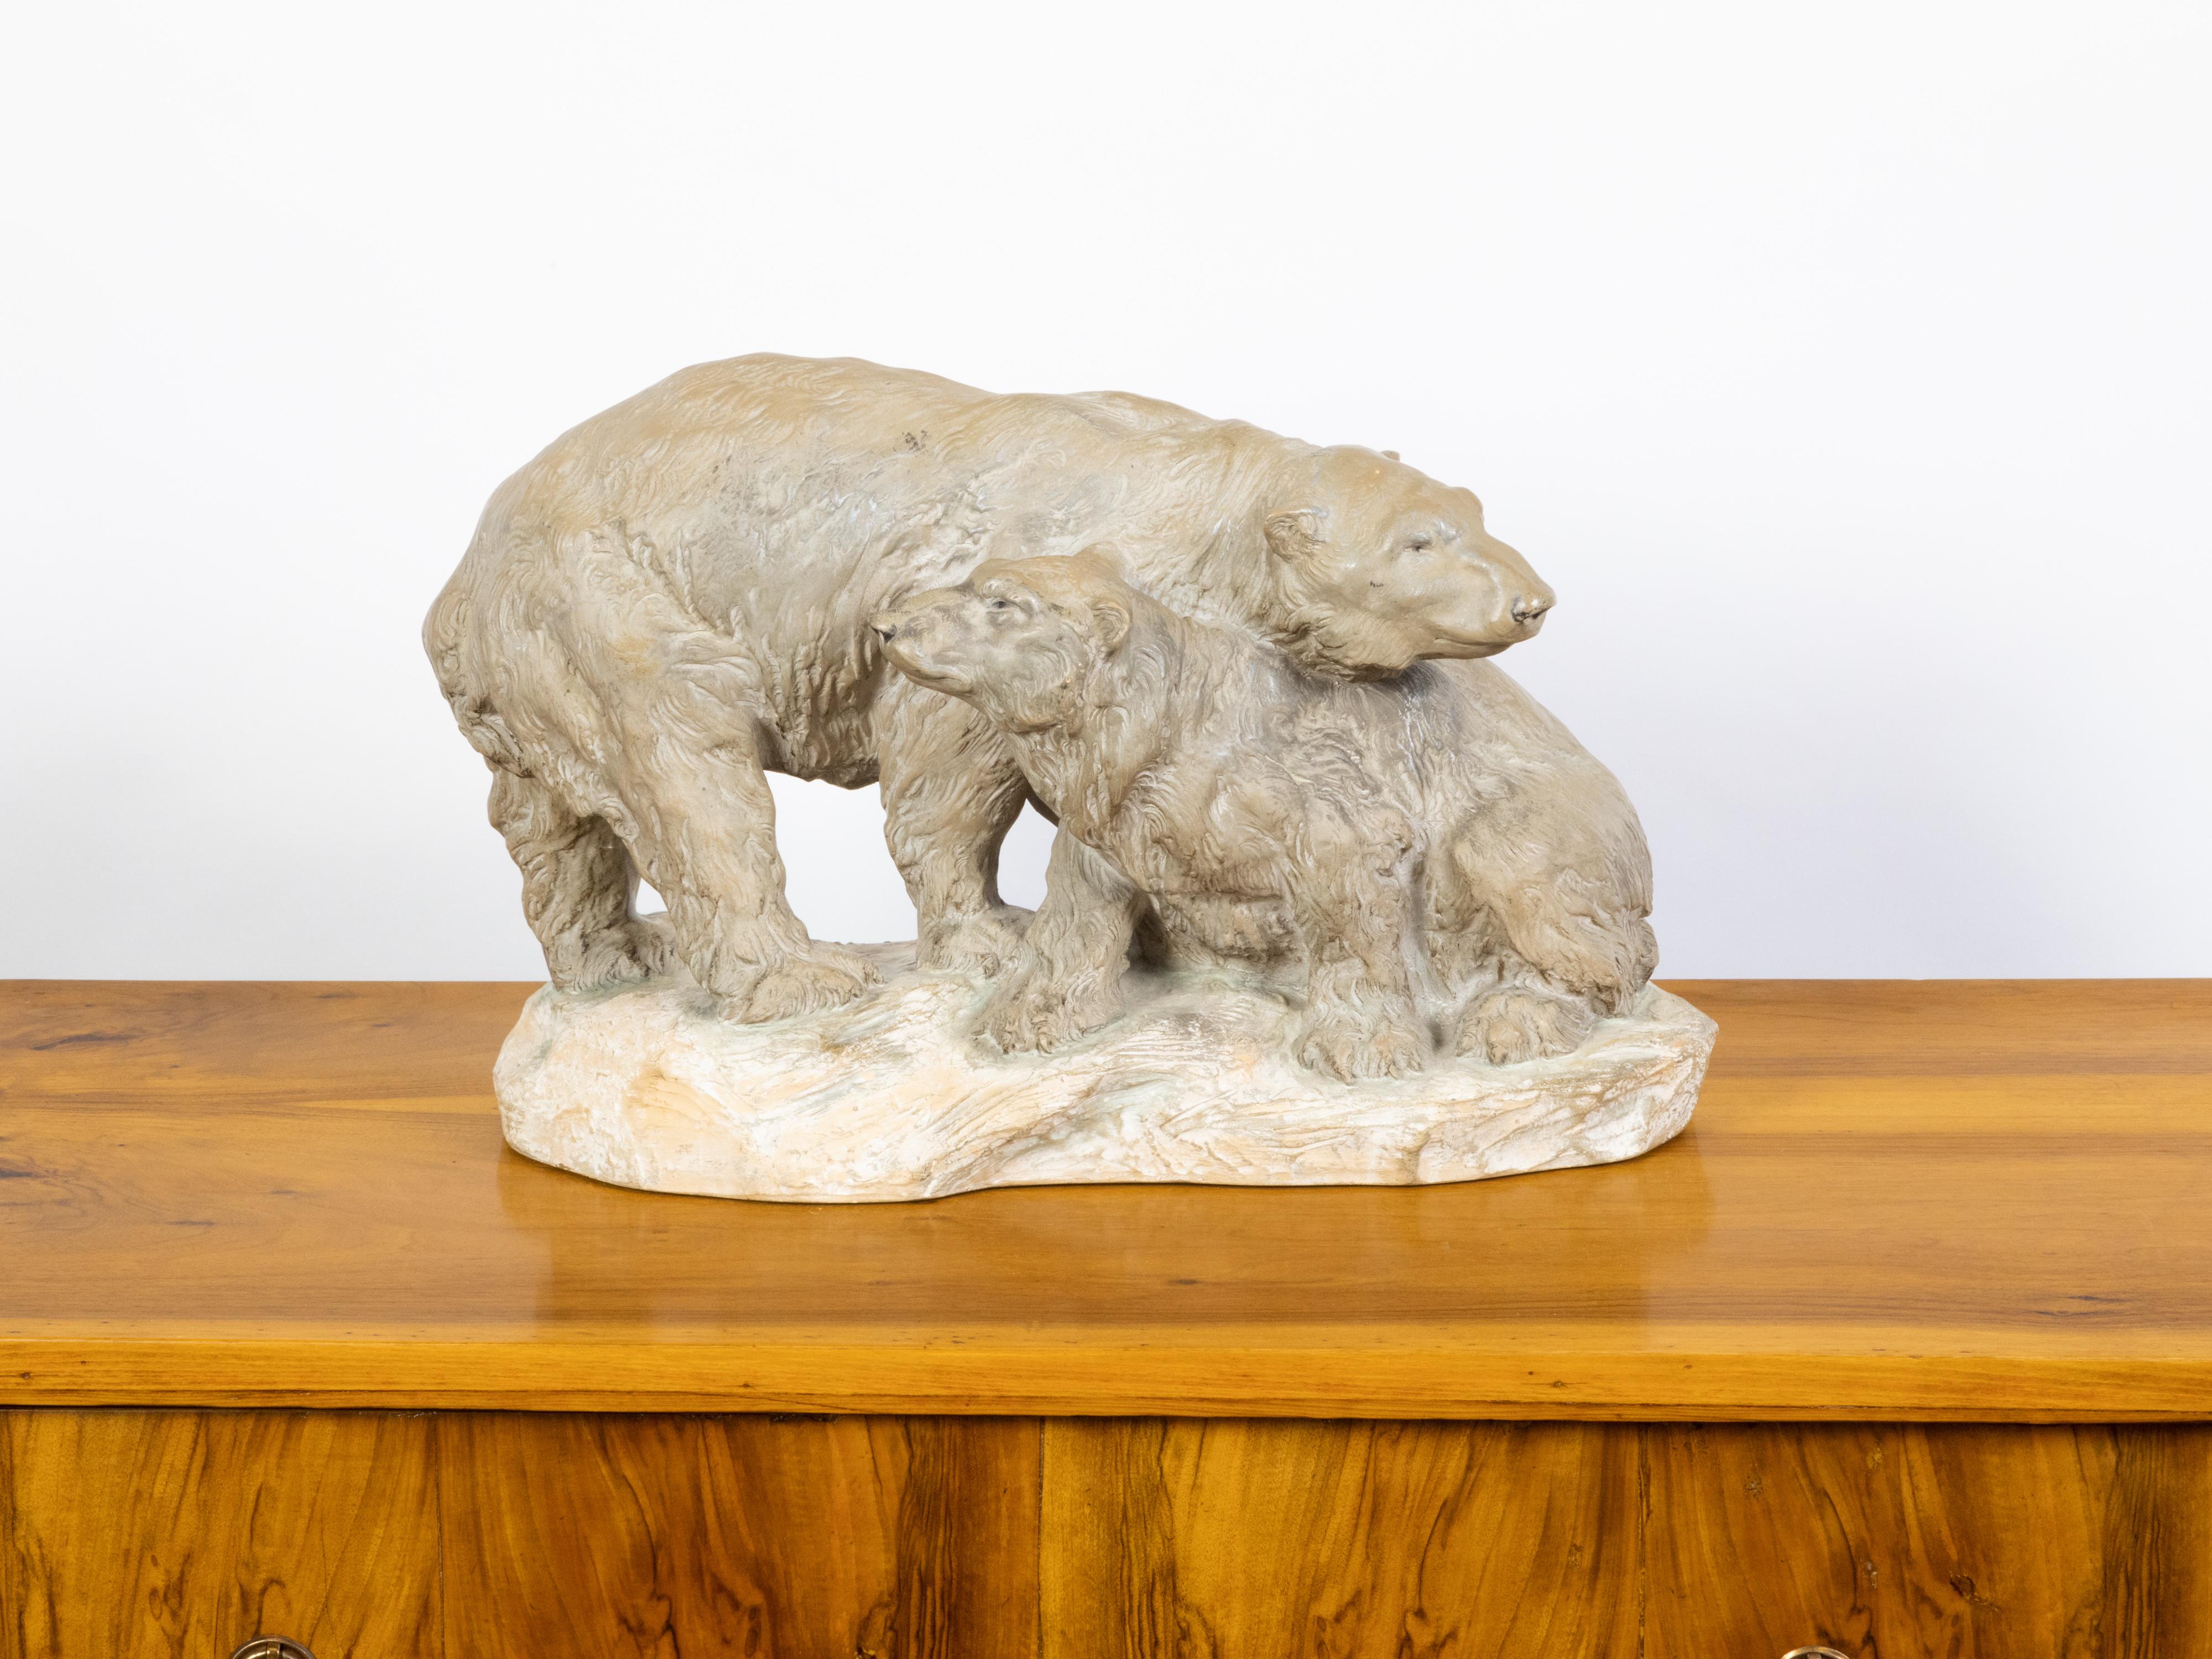 A Continental terracotta sculpture from the mid 20th century, depicting two bears on a base. Created during the midcentury period, this terracotta sculpture depicts an adult bear standing on an oval shaped base, protectively leaning over a smaller